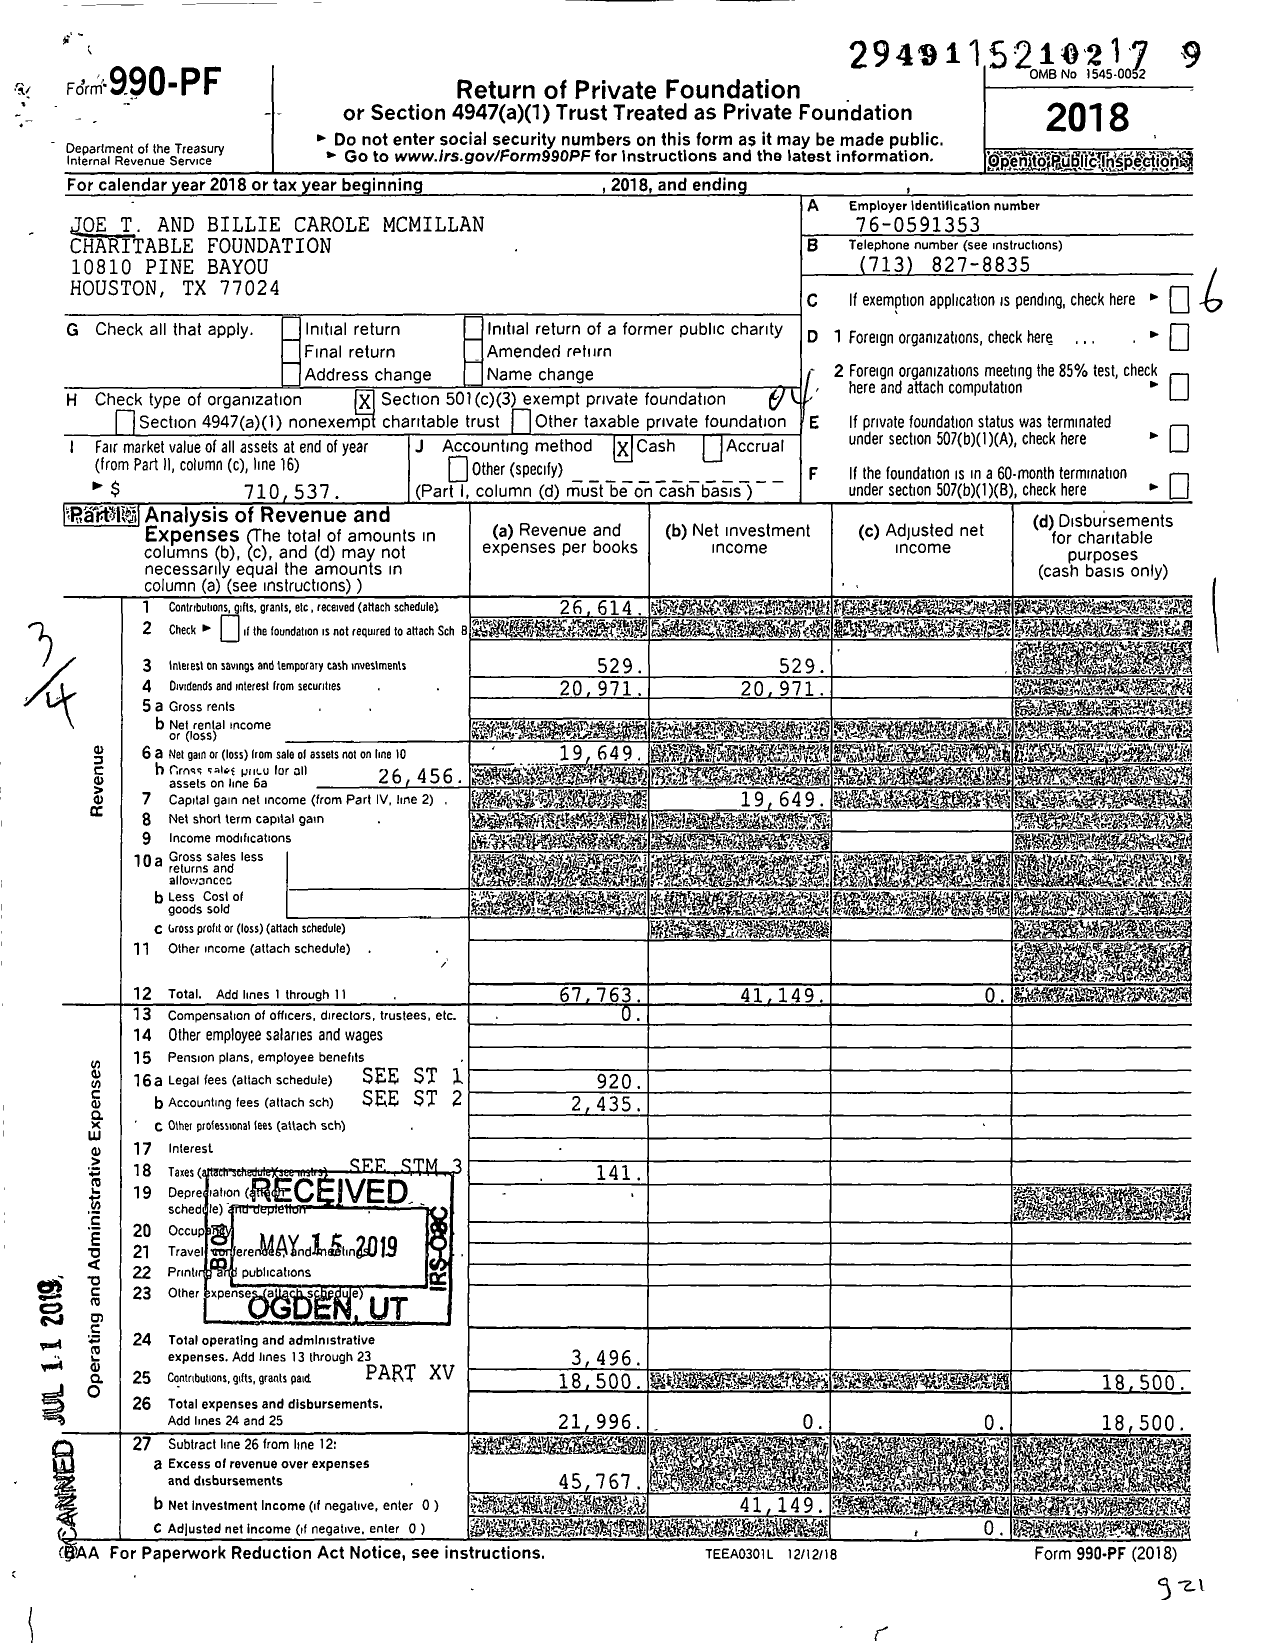 Image of first page of 2018 Form 990PF for Joe T and Billie Carole Mcmillan Charitable Foundation